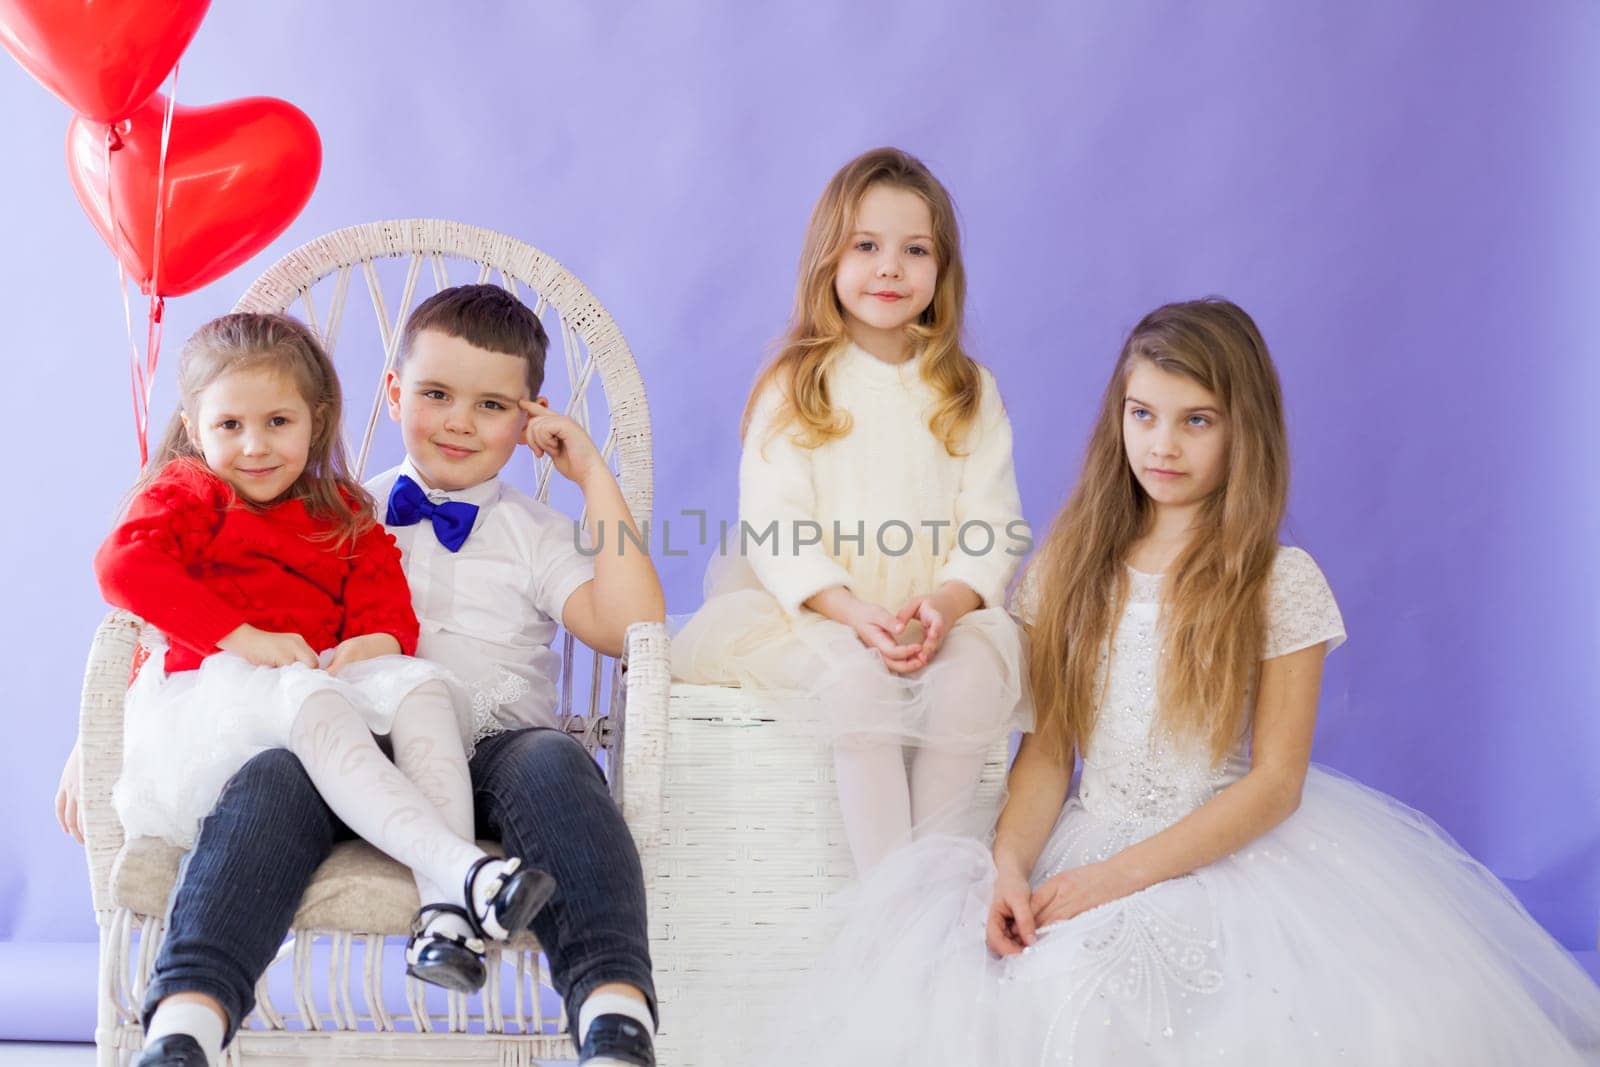 Children beautifully dressed waiting for a holiday with red Valentine's Day balls